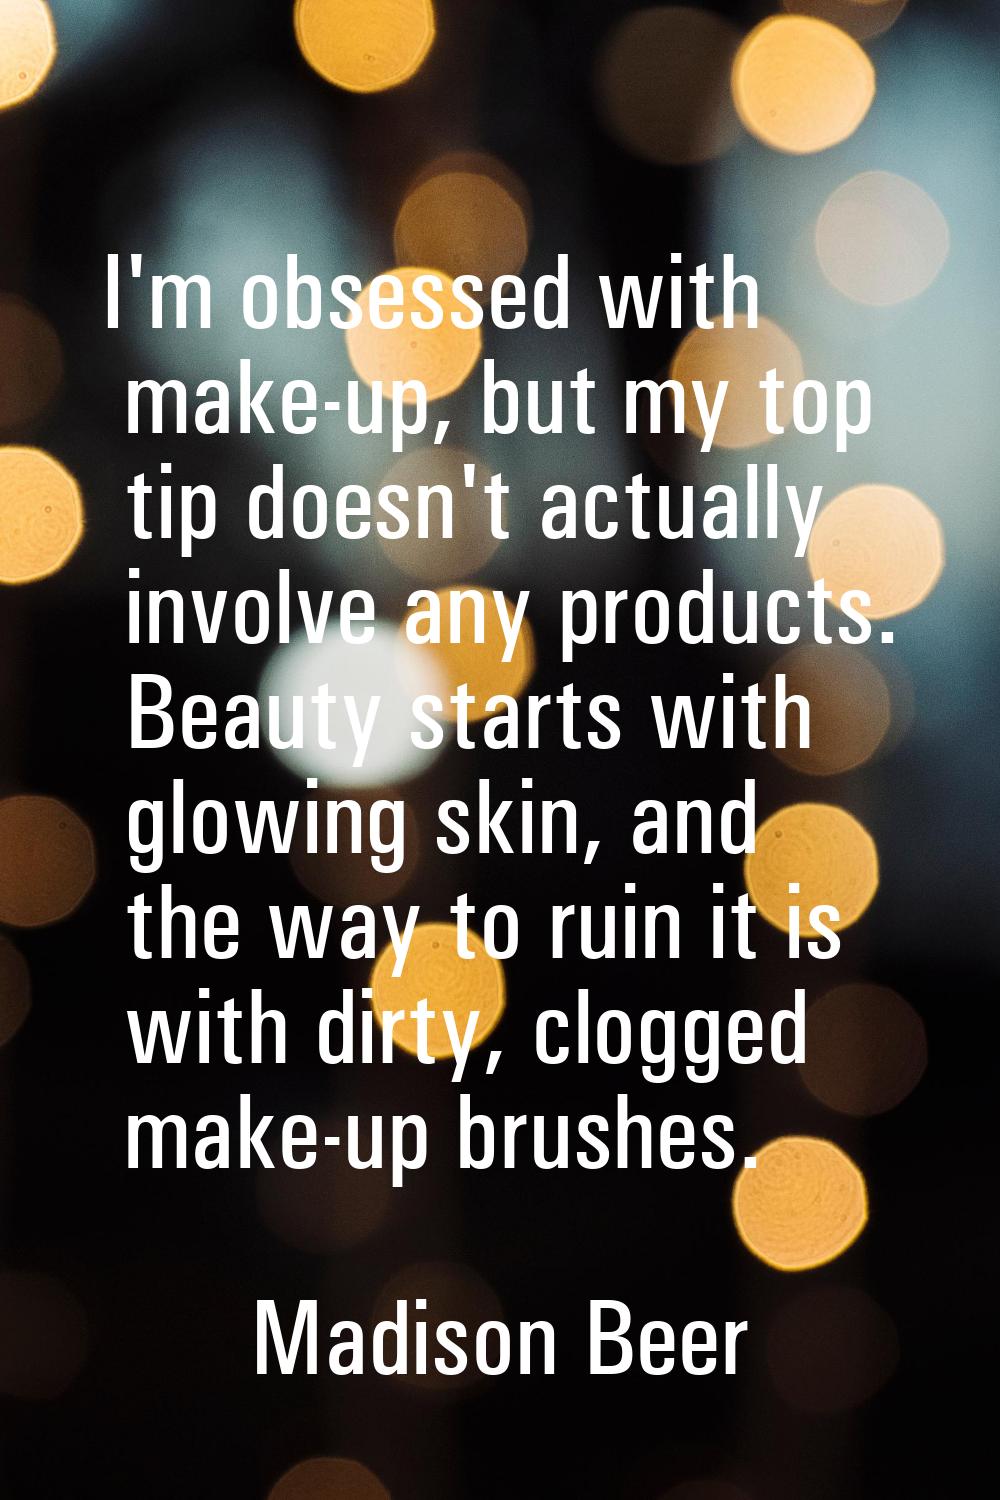 I'm obsessed with make-up, but my top tip doesn't actually involve any products. Beauty starts with